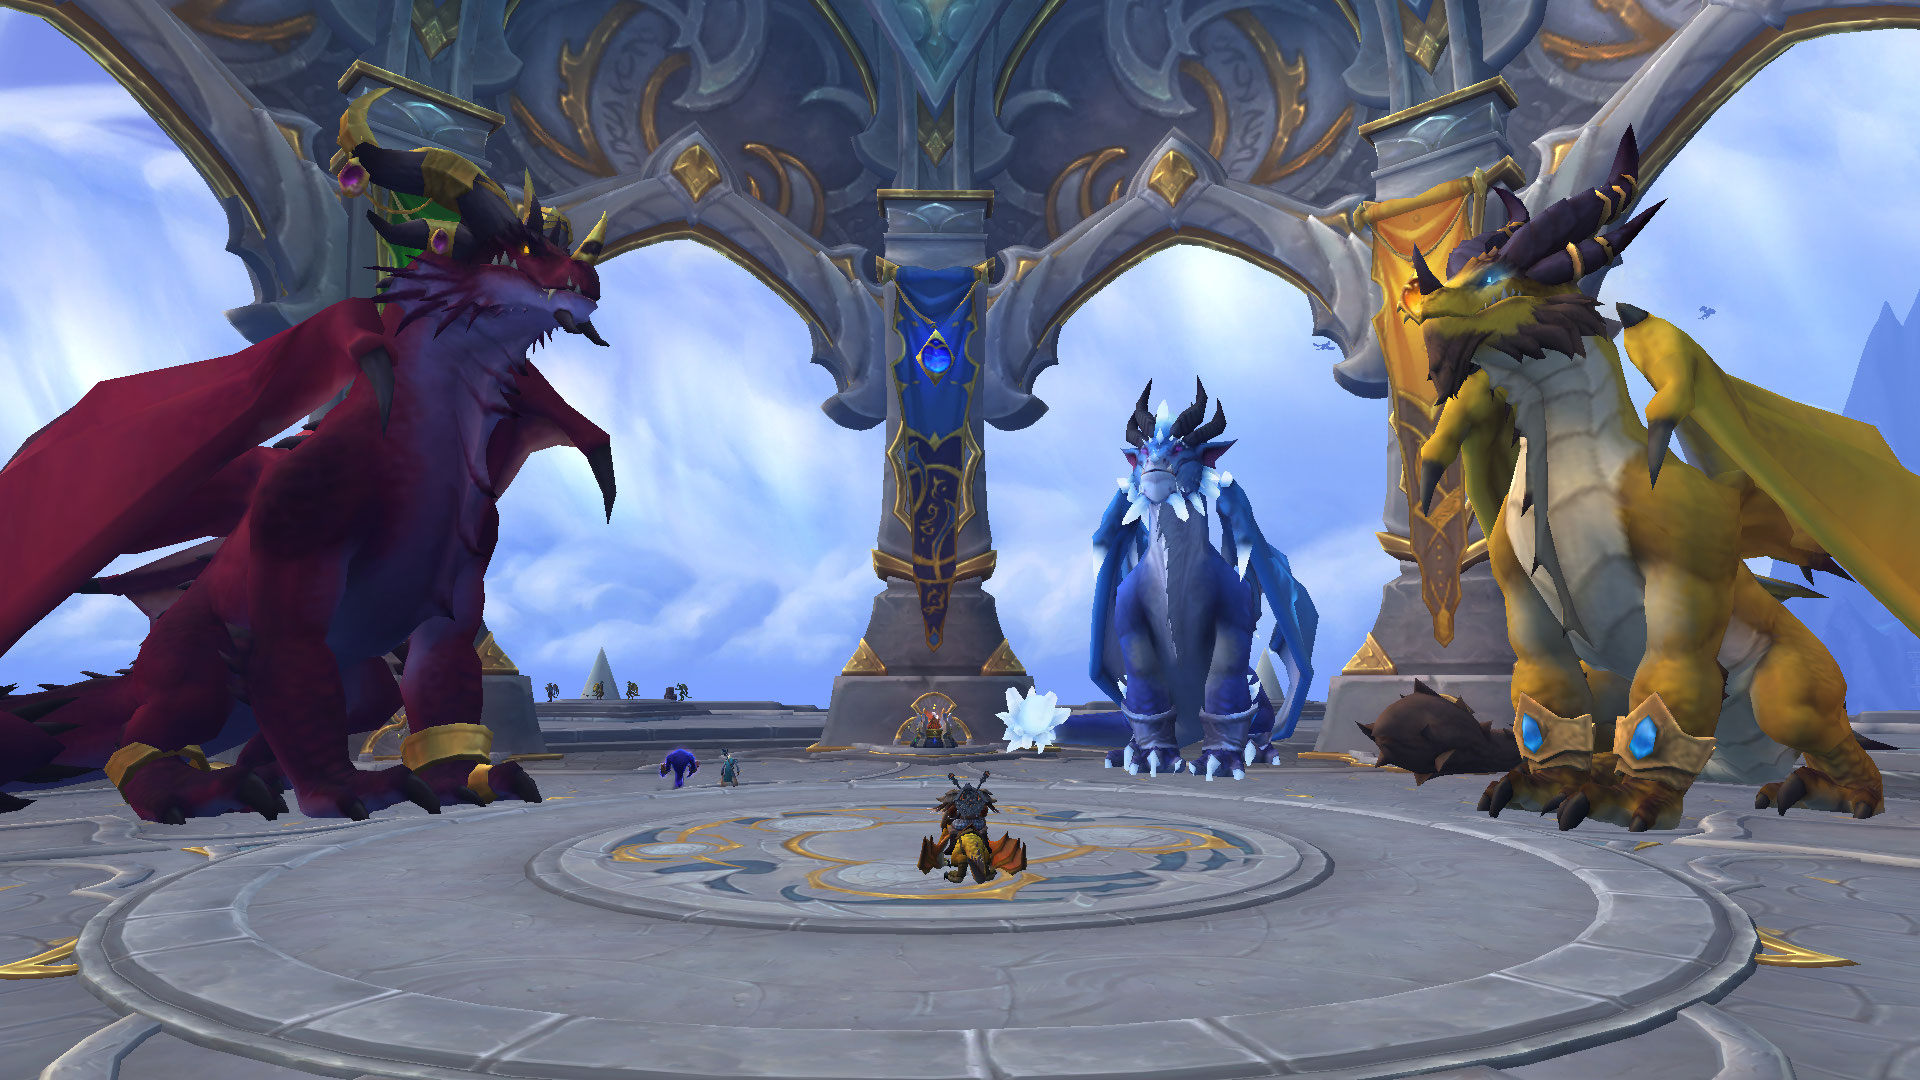 What Are The Best Strategies For Leveling Up Fast In WoW?